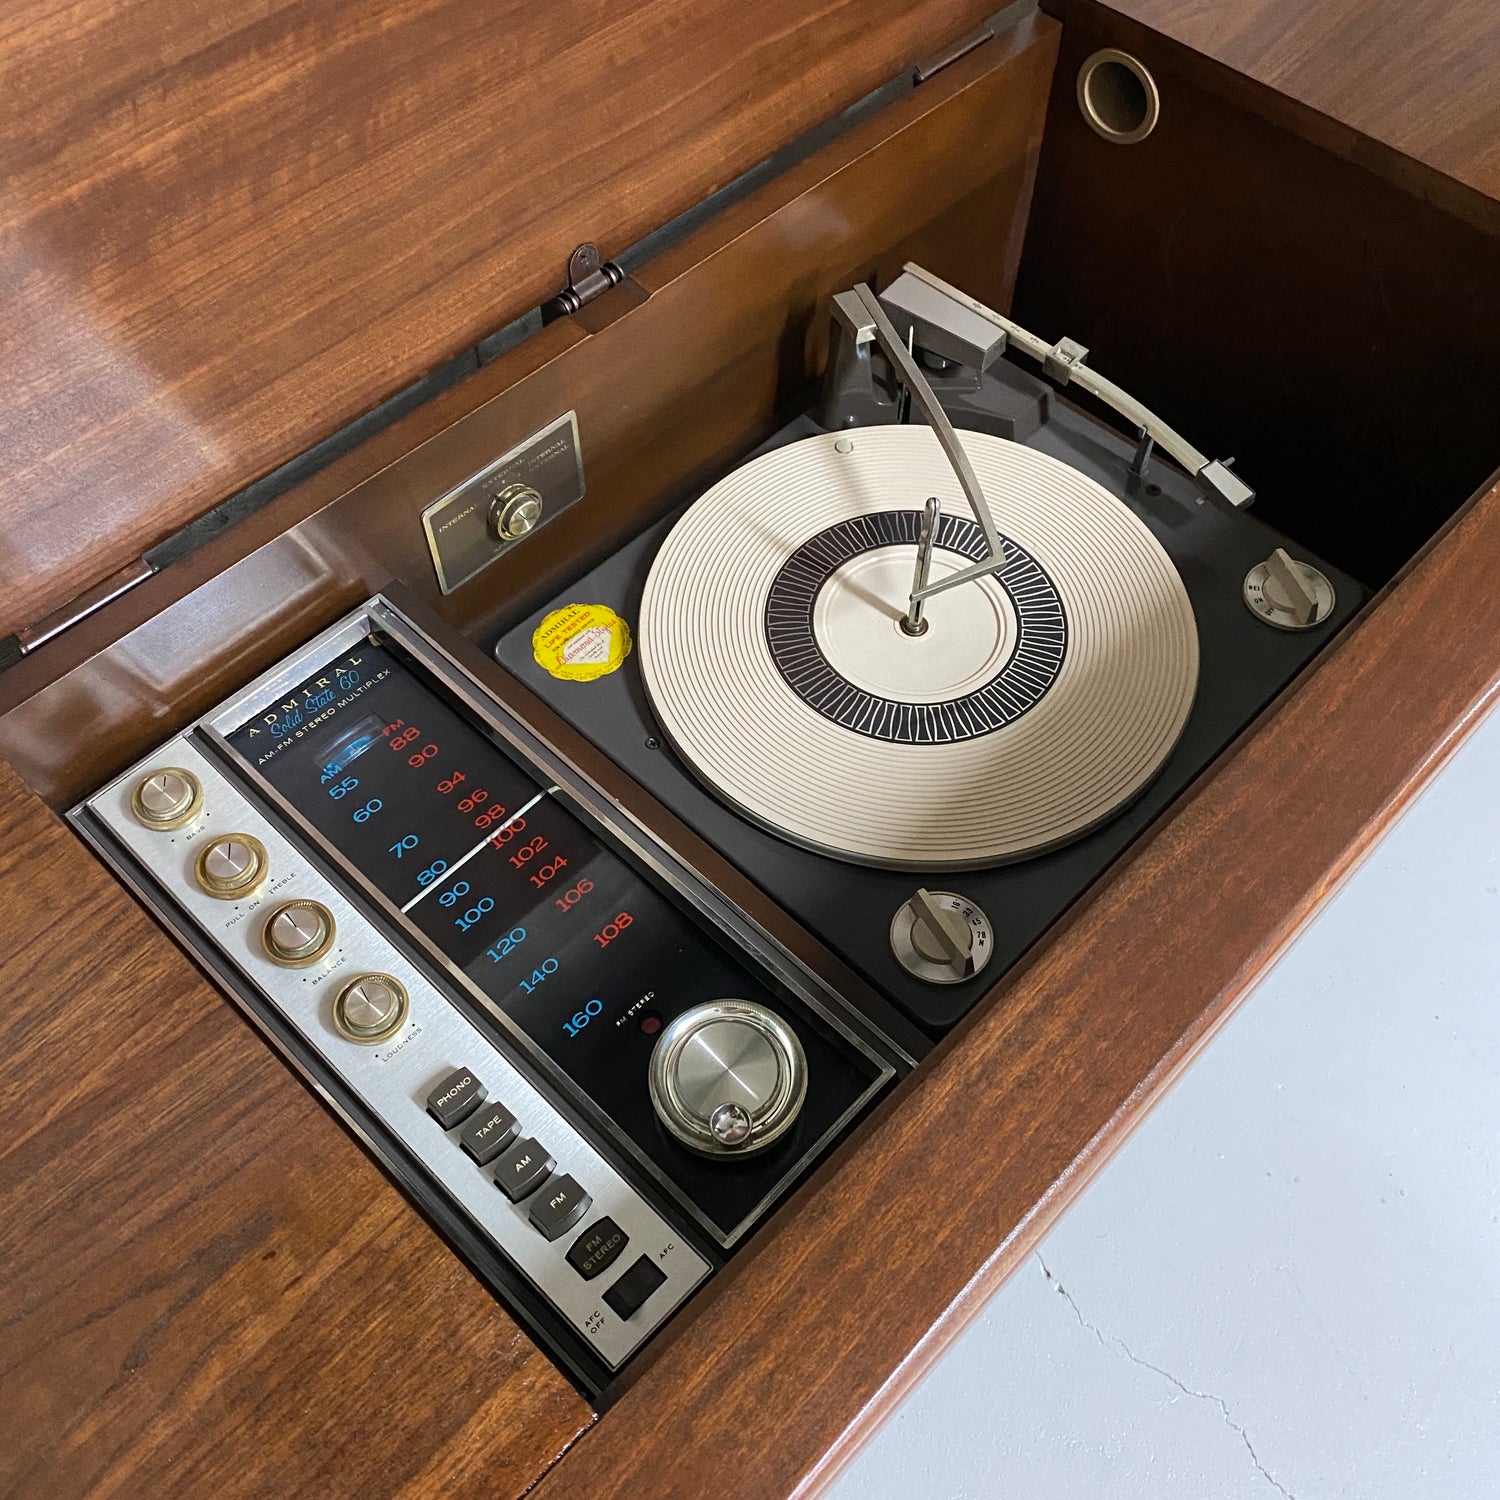 **SOLD OUT**  ADMIRAL Stereo Console 60s Vintage Record Player AM FM Bluetooth Alexa The Vintedge Co.